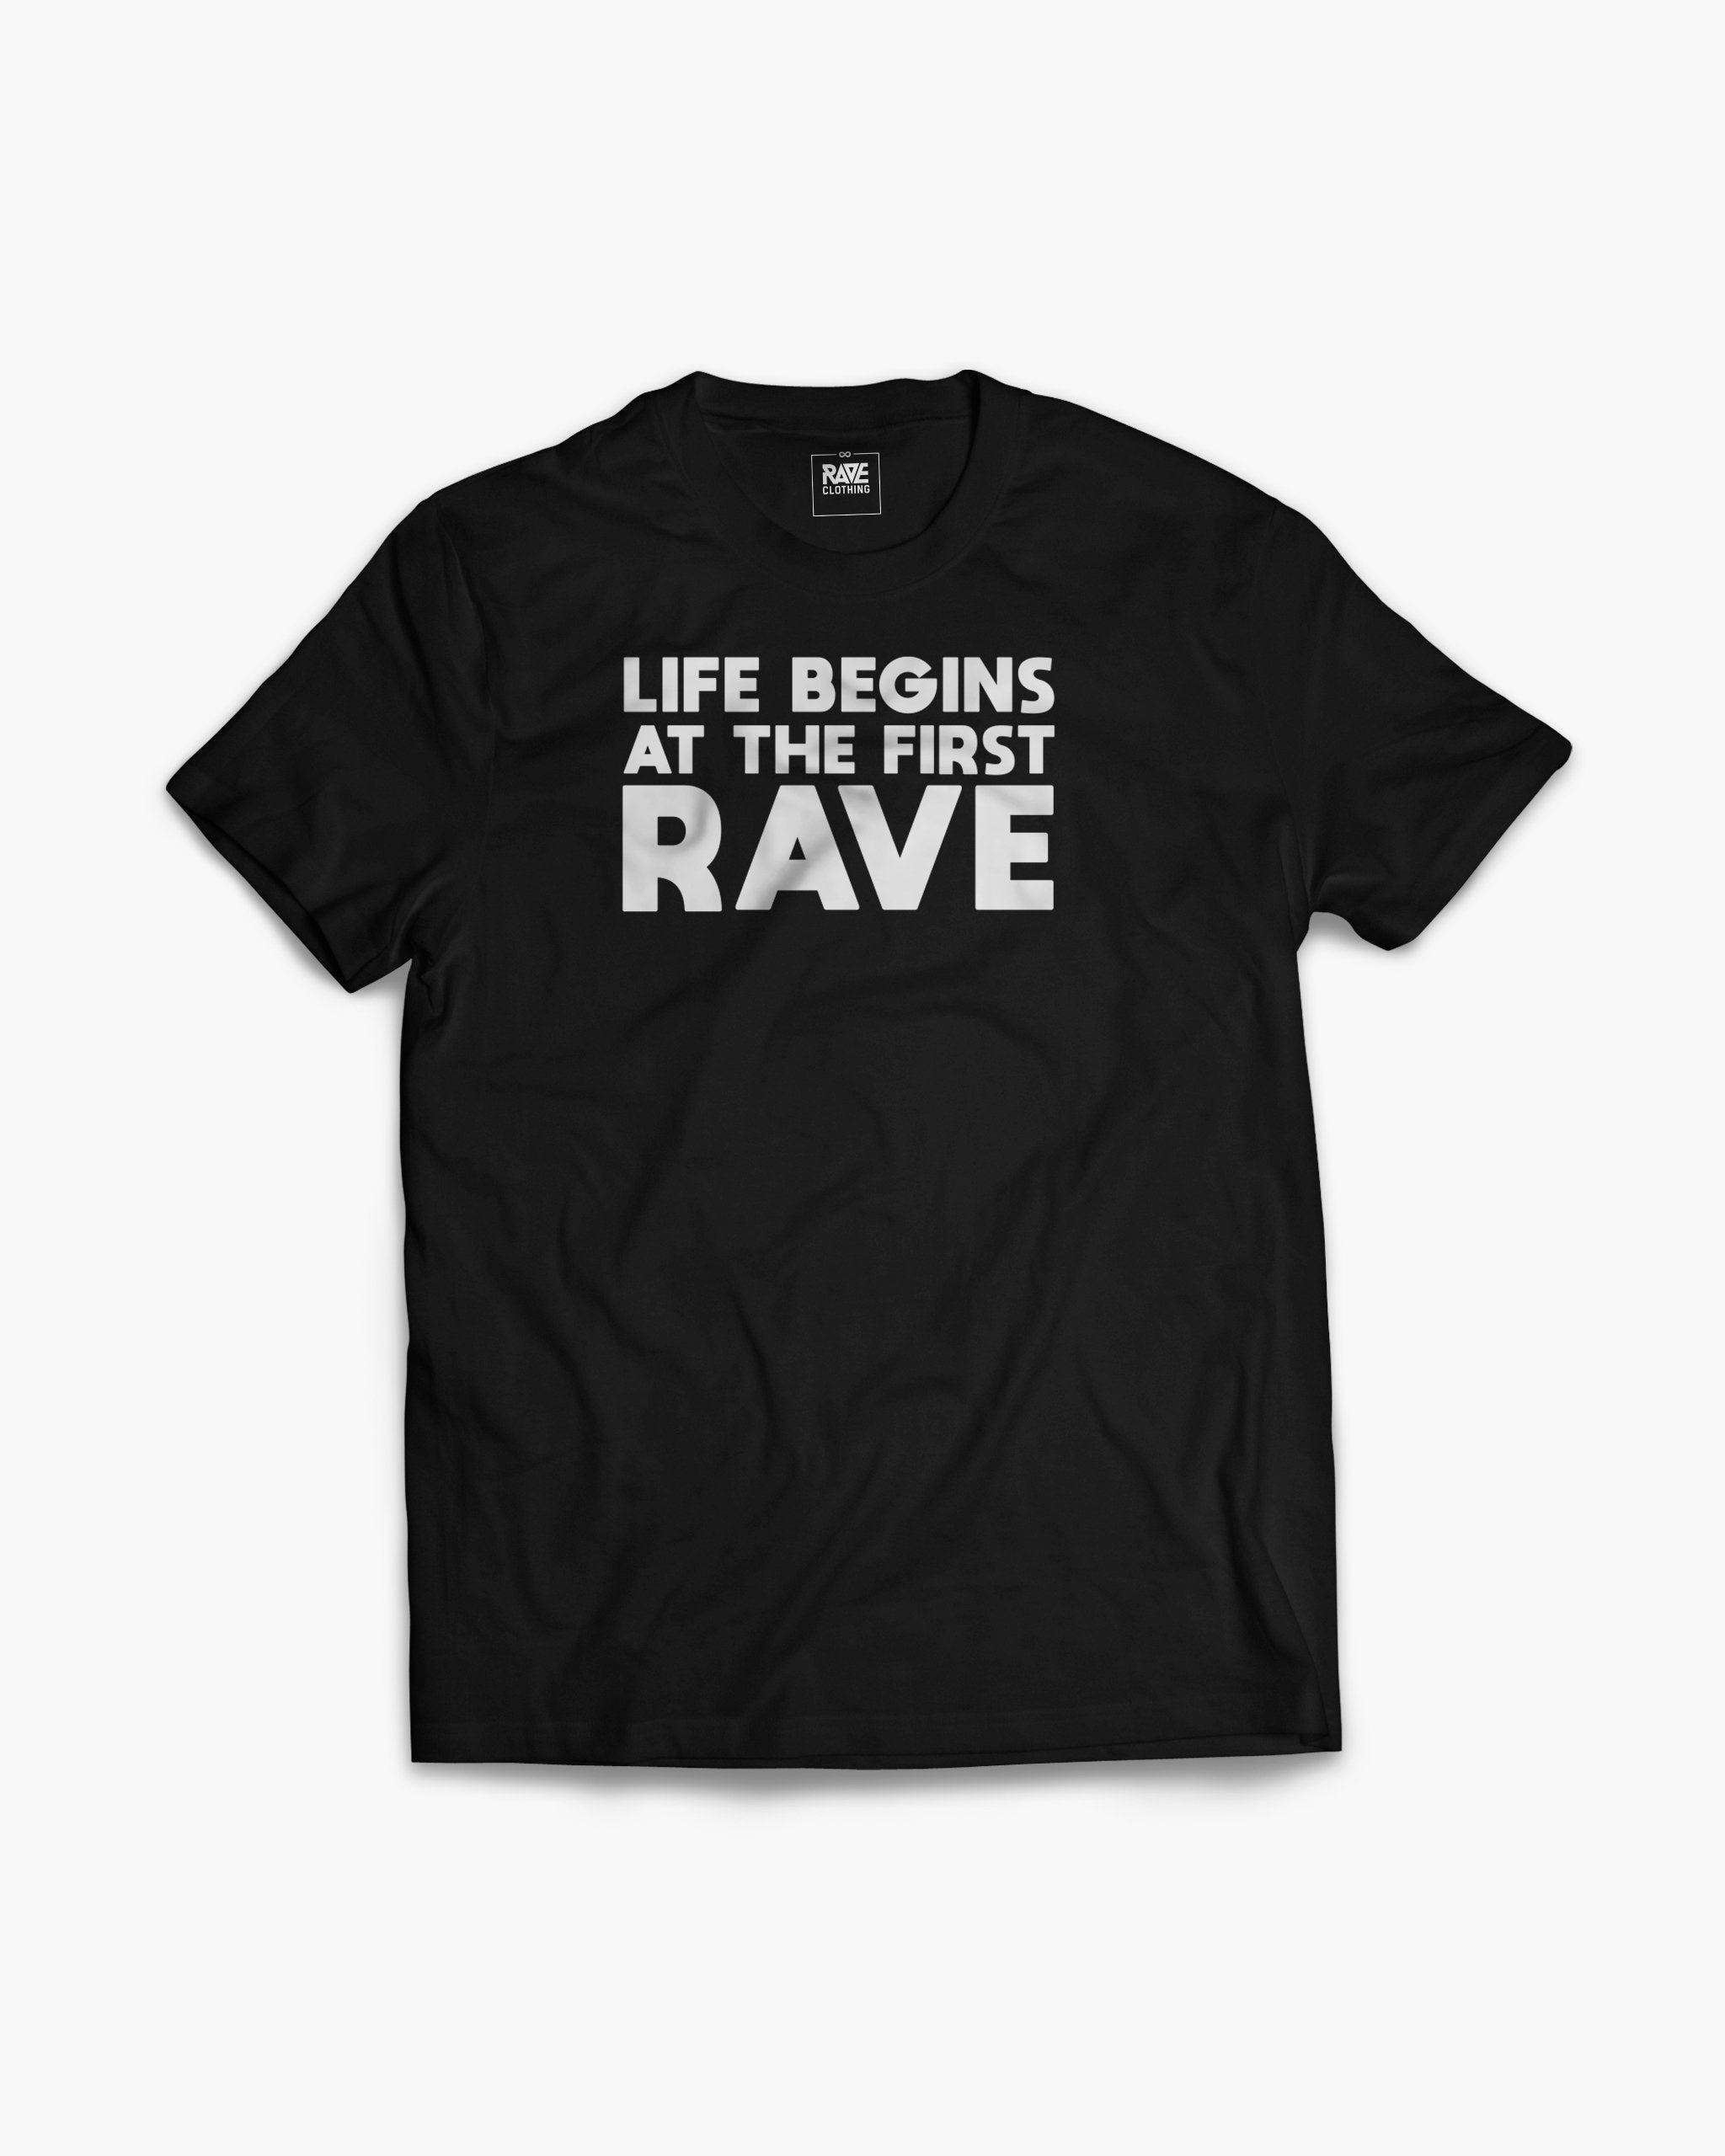 Getting Rave Clothing Right